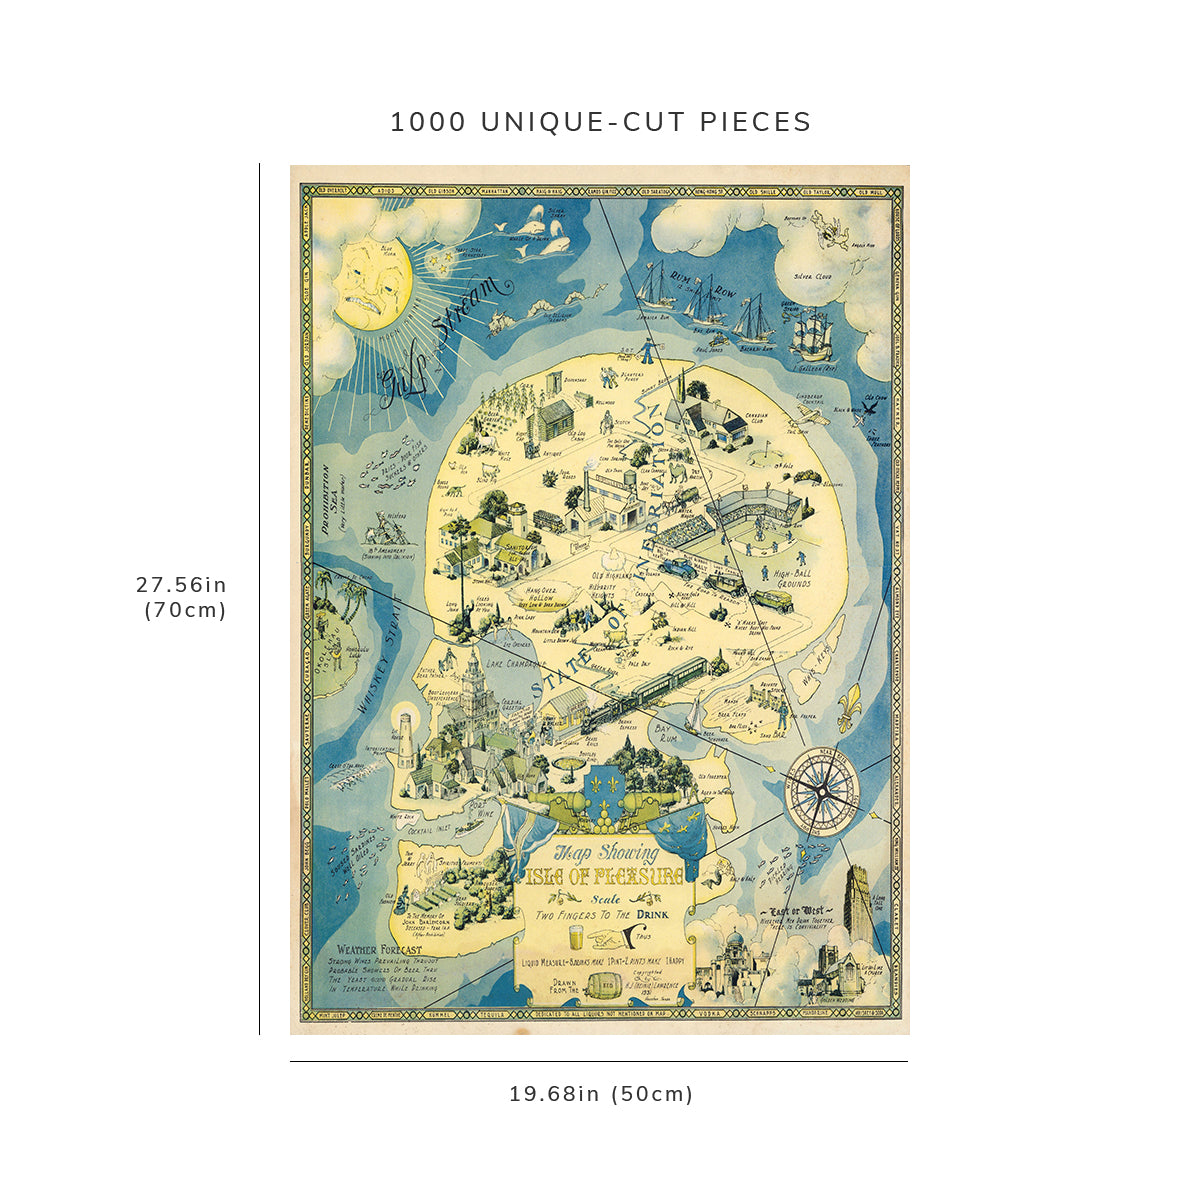 1000 Piece Jigsaw Puzzle: 1931 Map of The Isle of Pleasure Celebrating The Joy of Drink